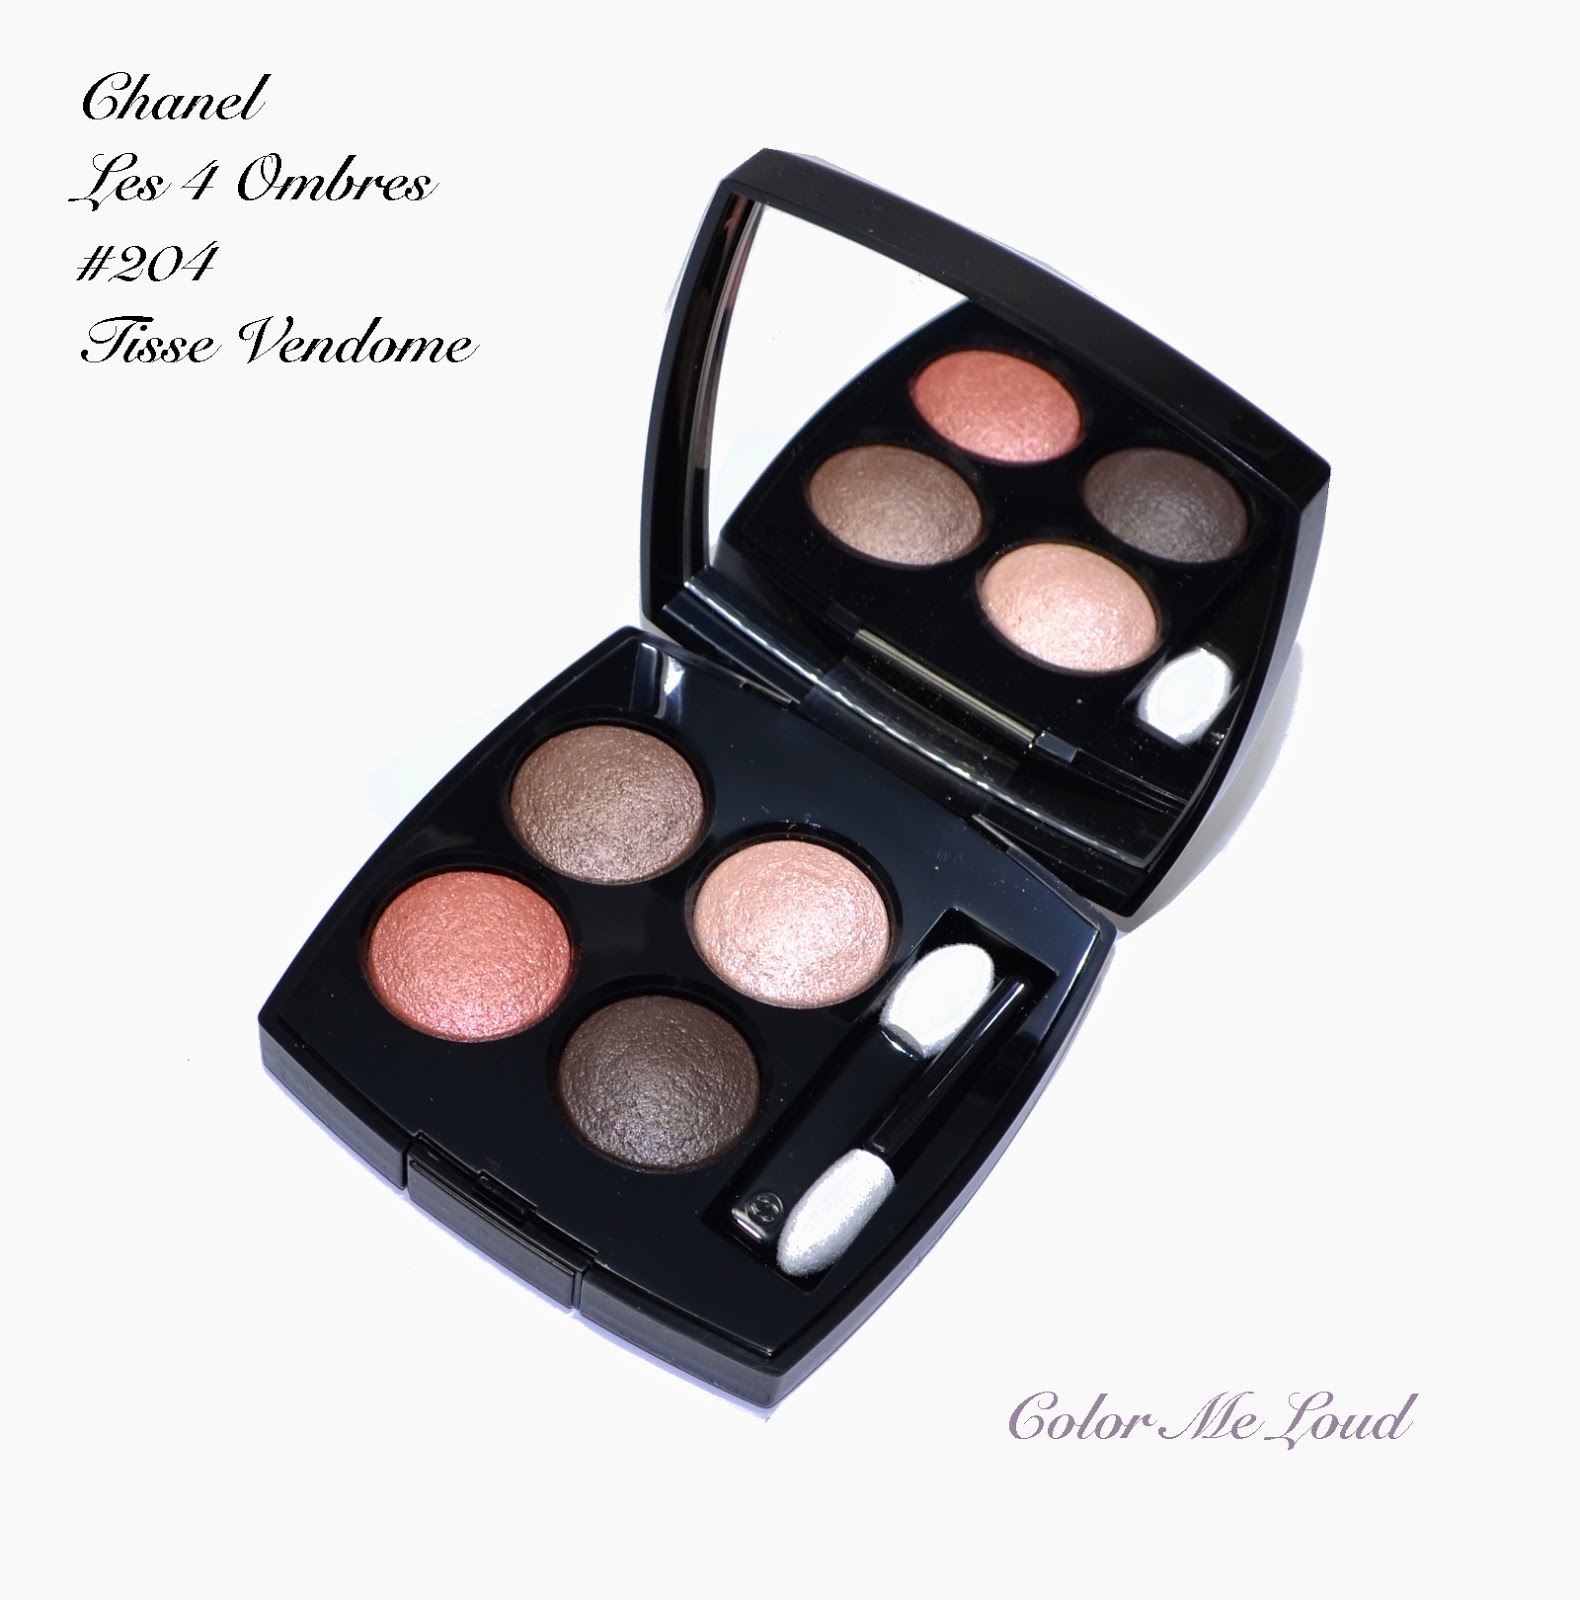 LES 4 OMBRES BYZANCE Eyeshadow Palette